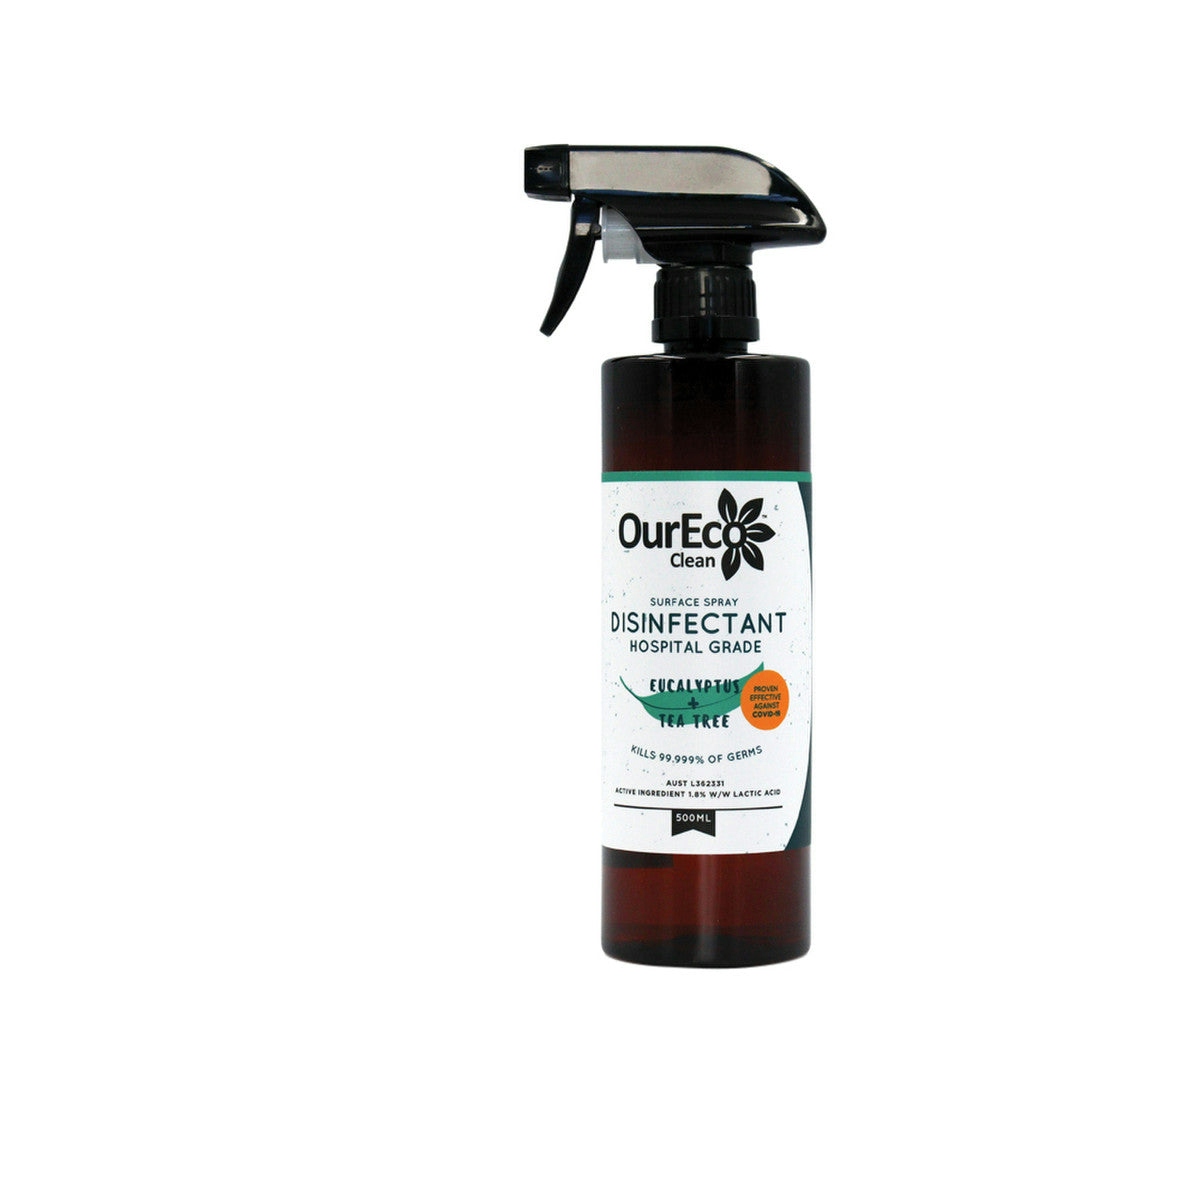 image of OurEco Clean Disinfectant Surface Spray Hospital Grade (Eucalyptus + Tea Tree) 500ml on white background